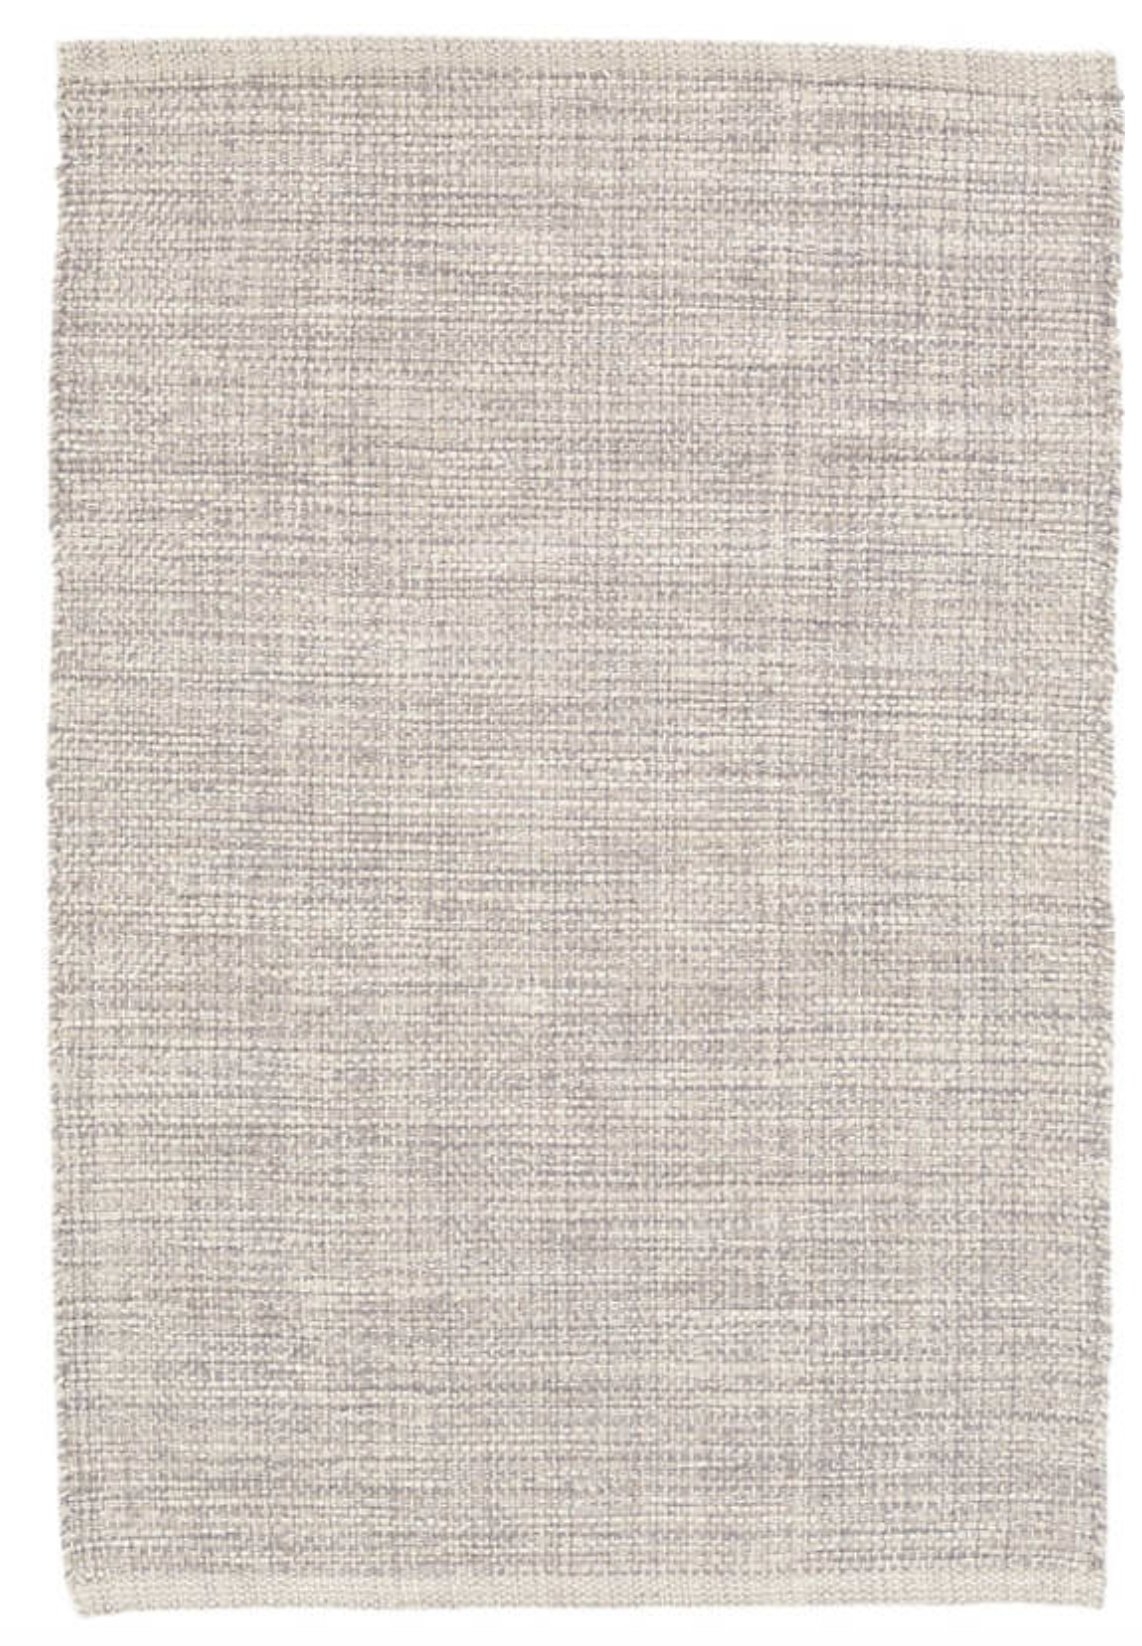 MARLED GREY WOVEN COTTON RUG, 9' x 12' - Image 0